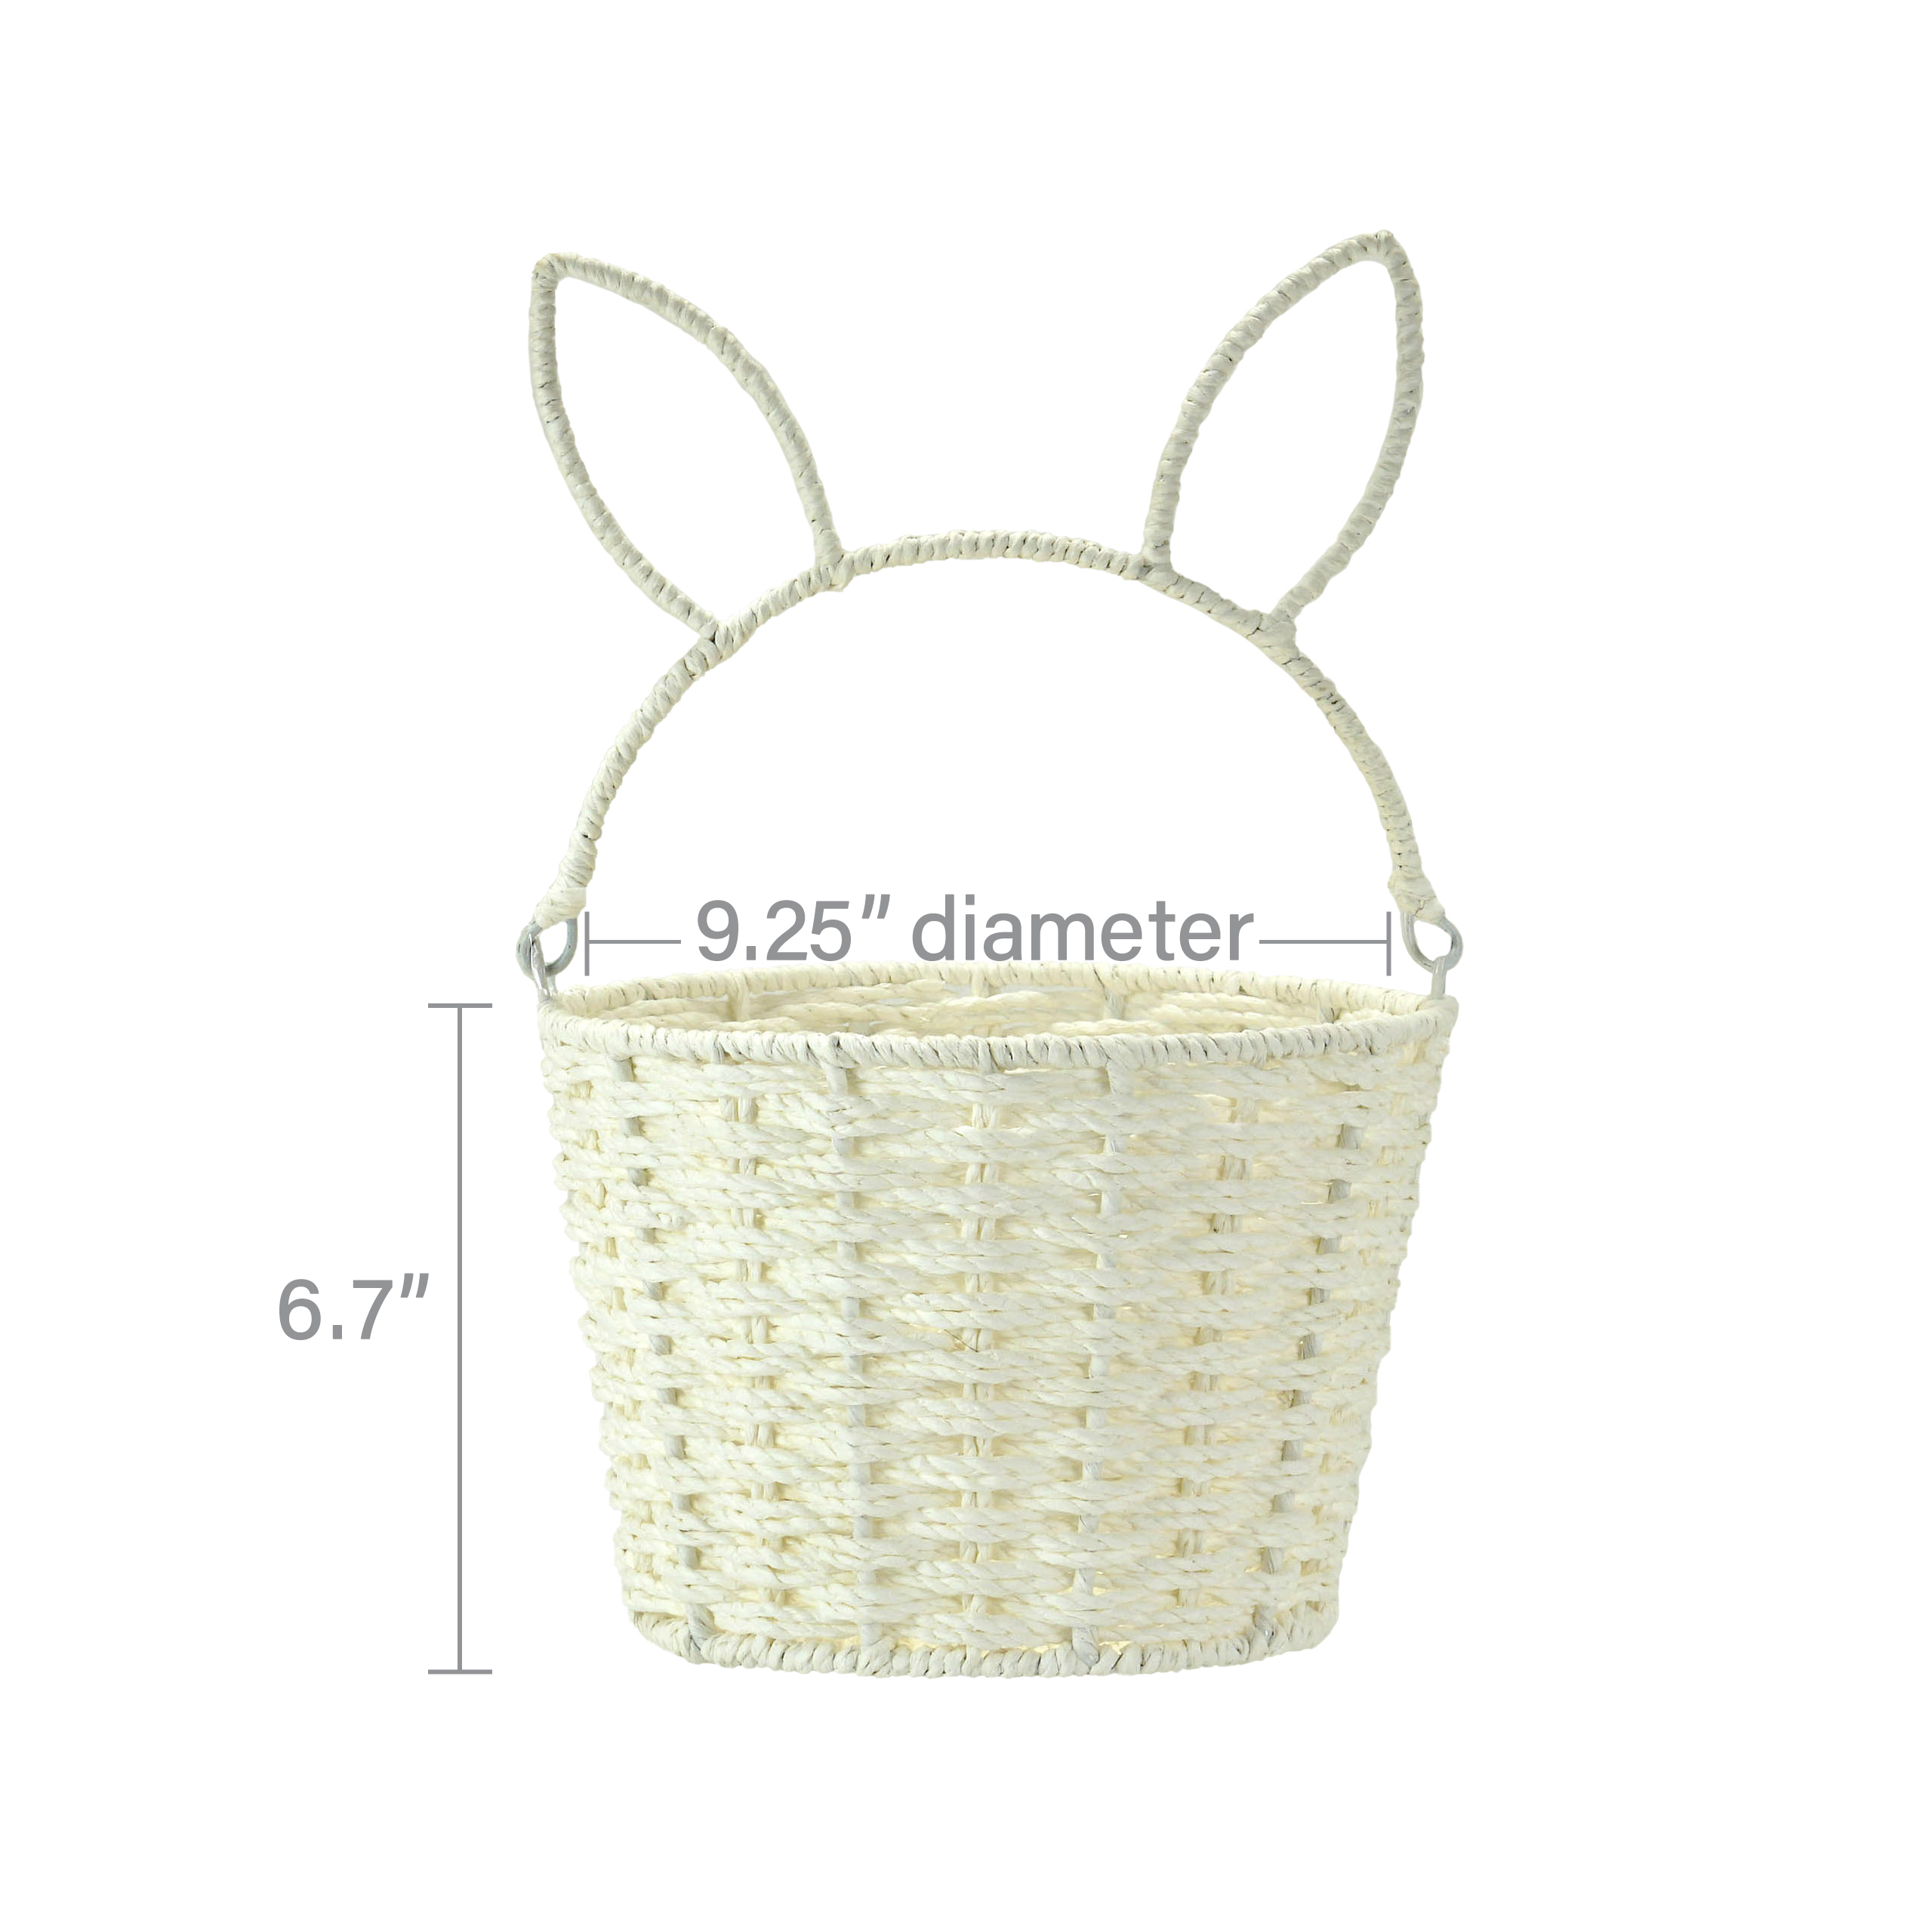 Way to Celebrate Medium Round White Paper Rope Easter Basket with Bunny Handle - image 4 of 11